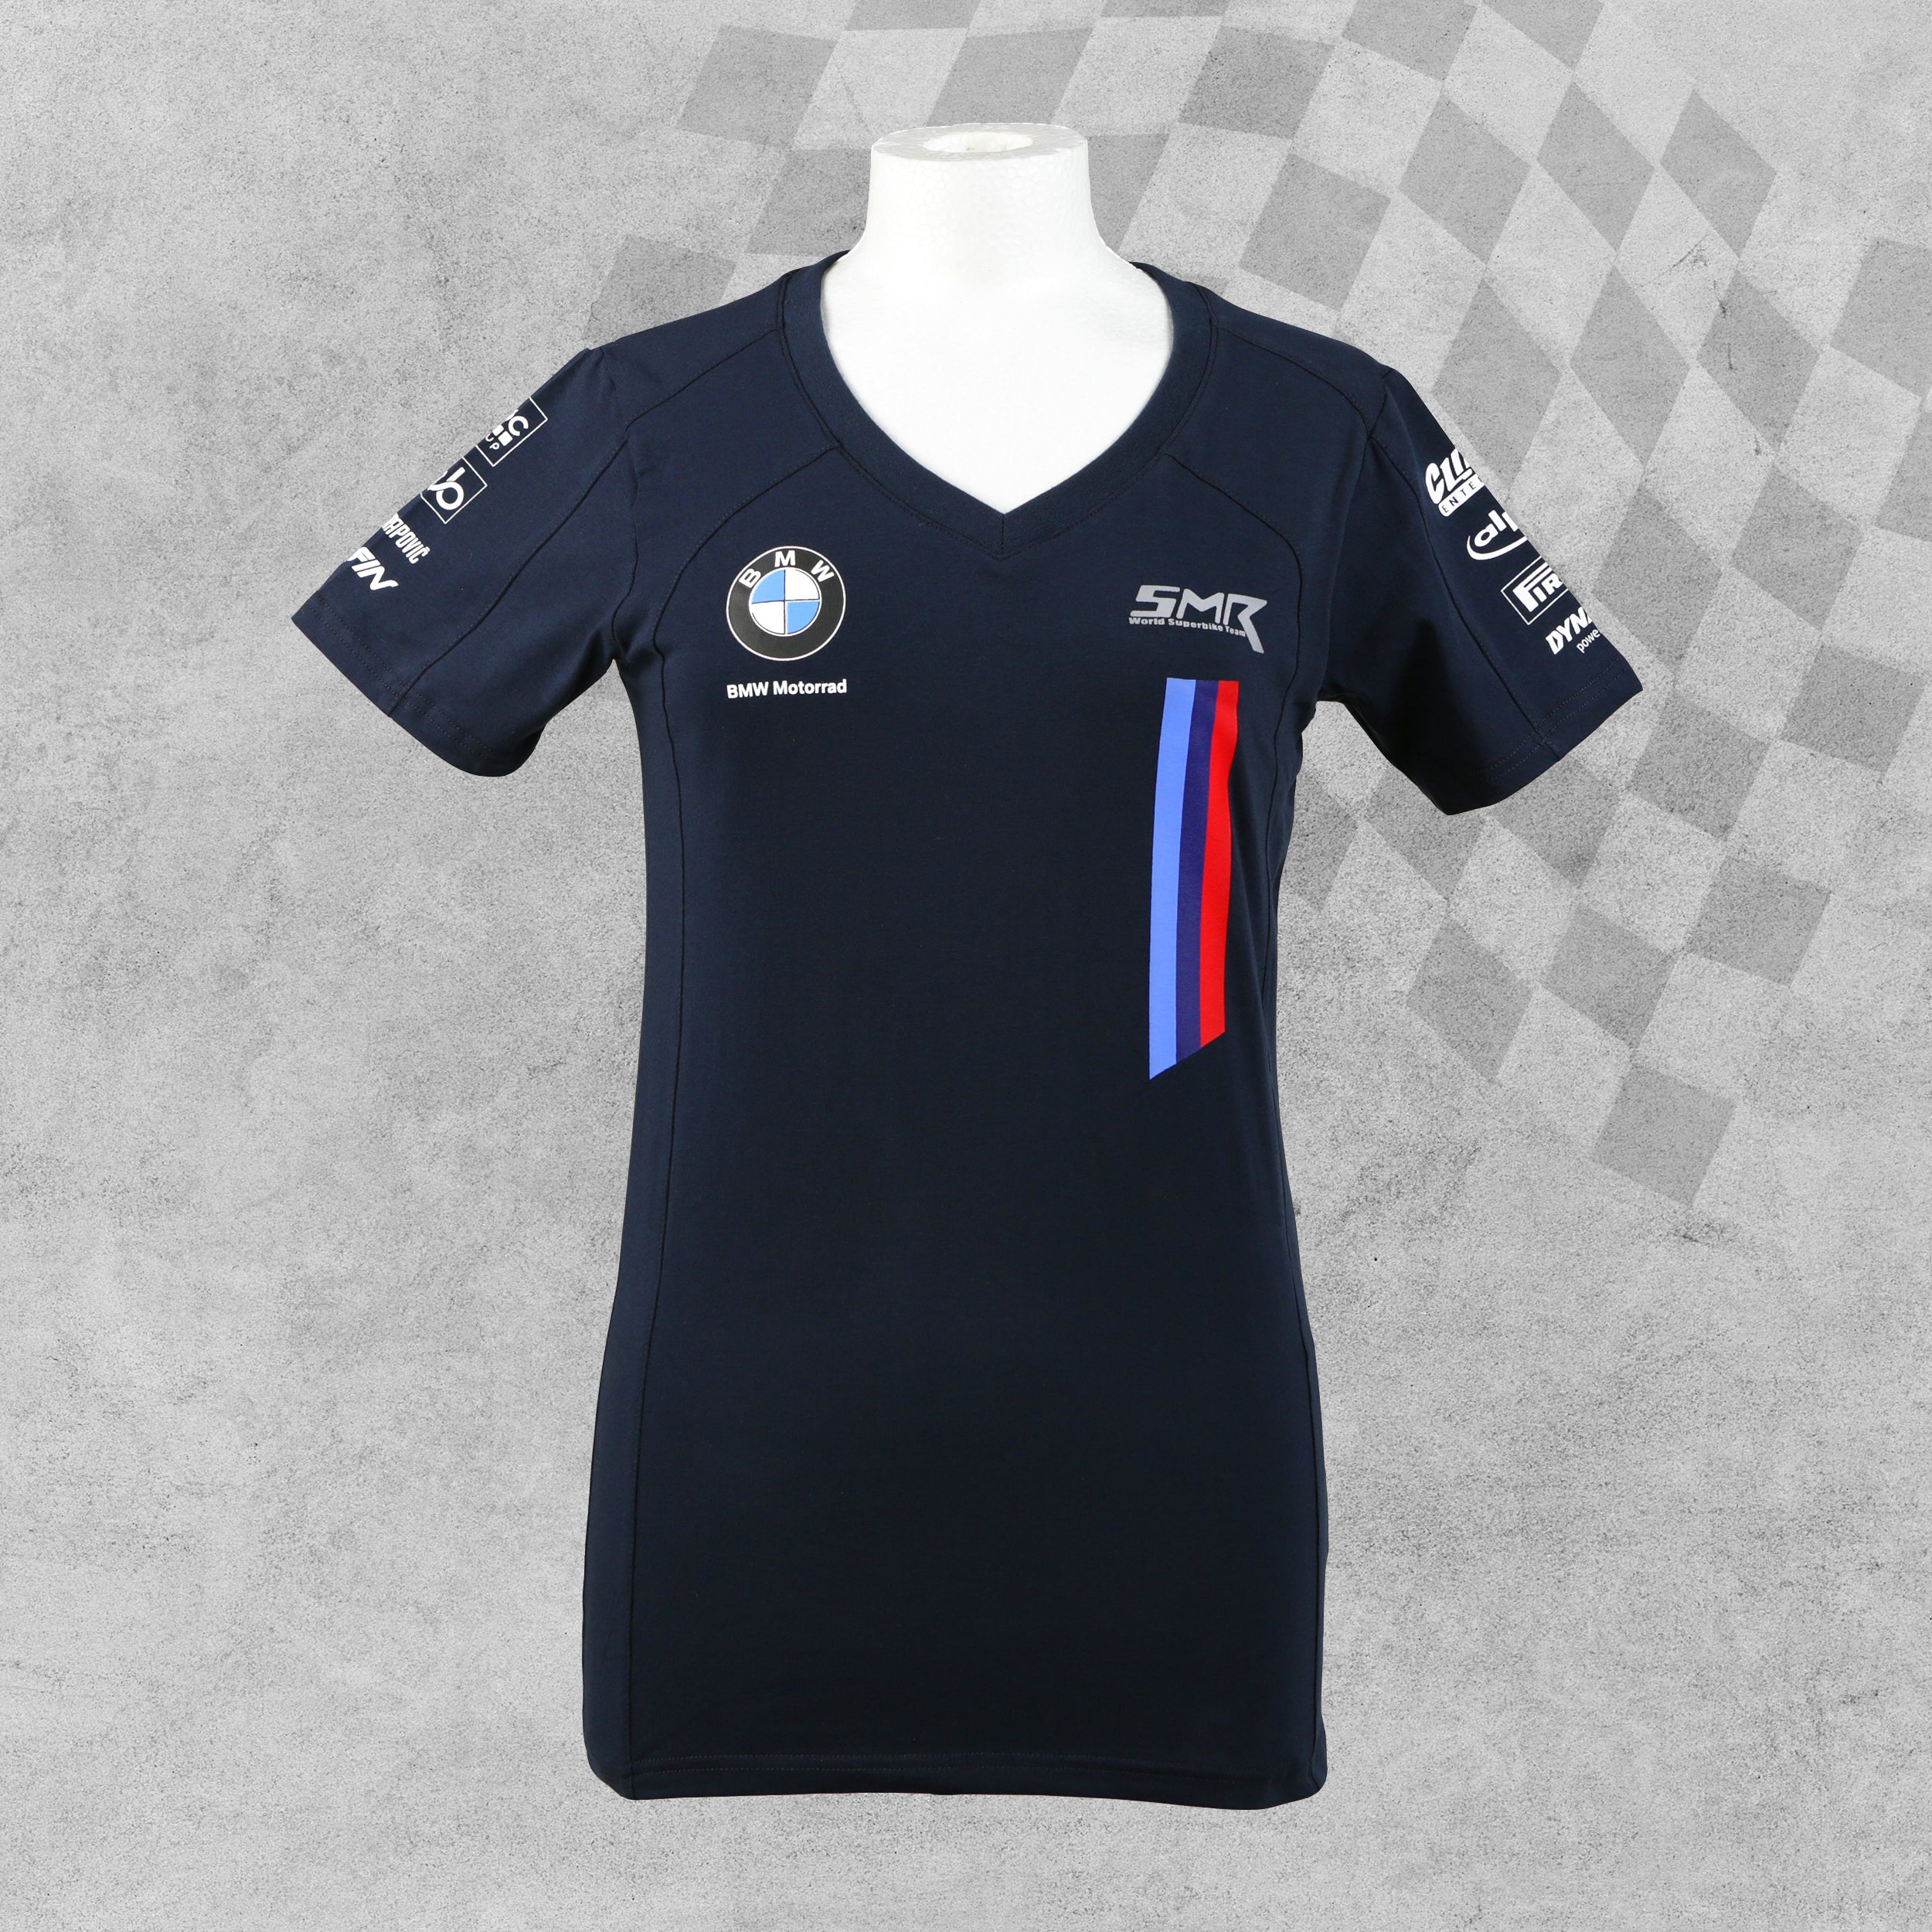 Motorrad WorldSBK Adult Women's T Shirt by BMW, sold by In-Excess